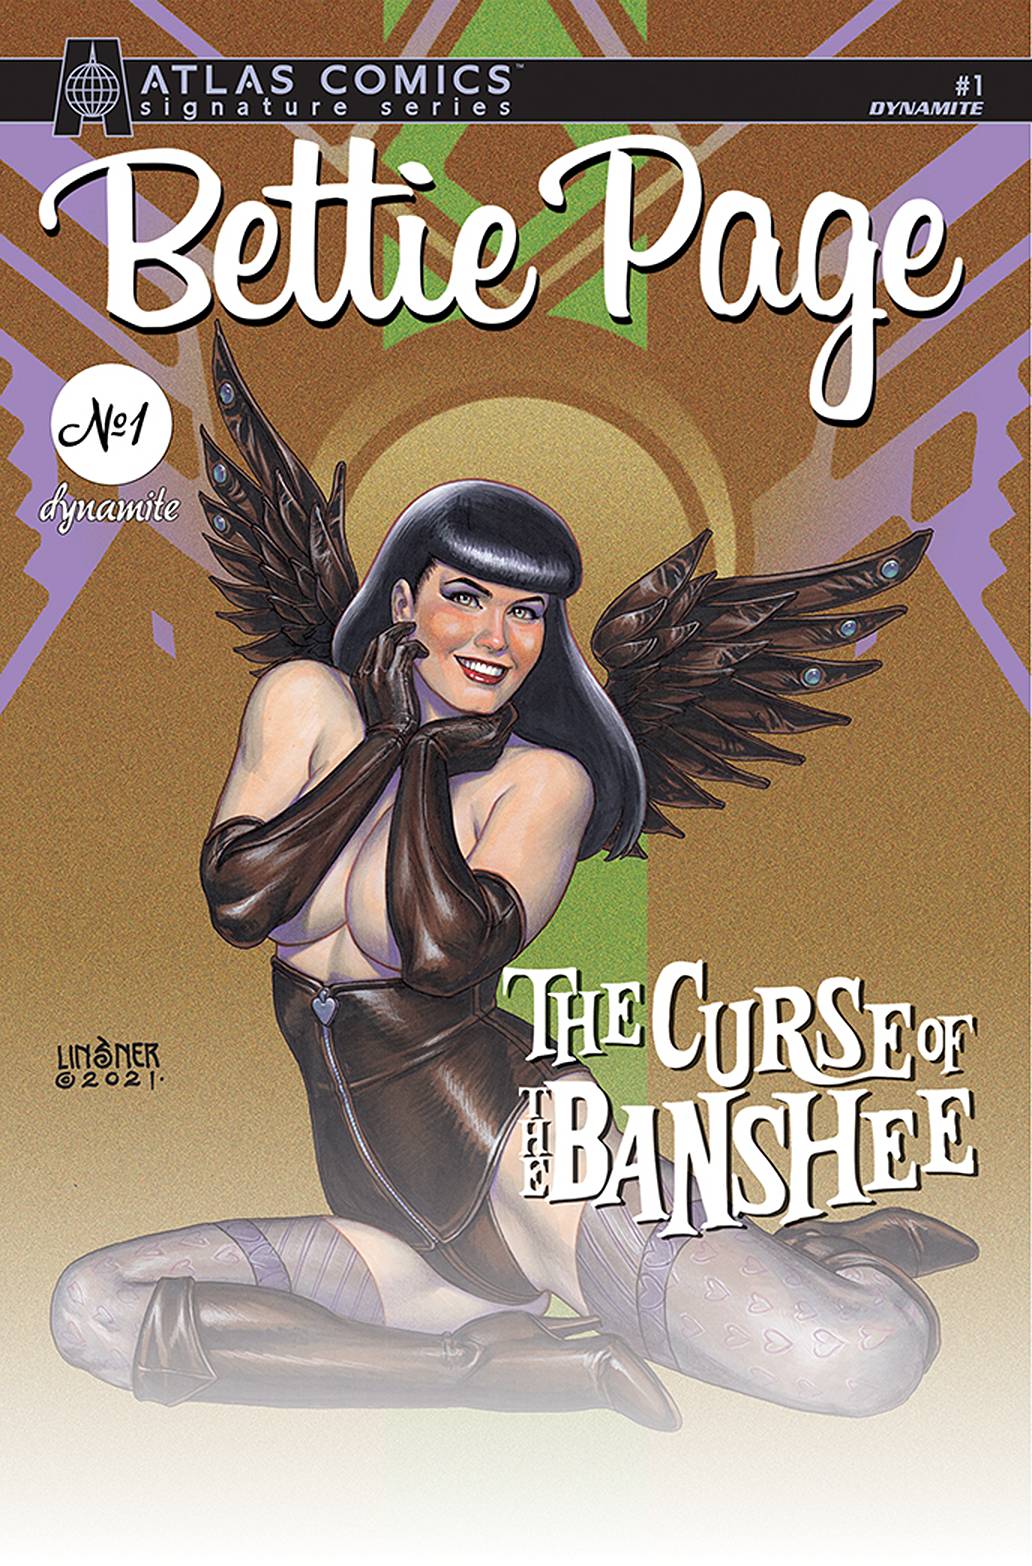 BETTIE PAGE & CURSE OF THE BANSHEE LINSNER SGN ATLAS ED